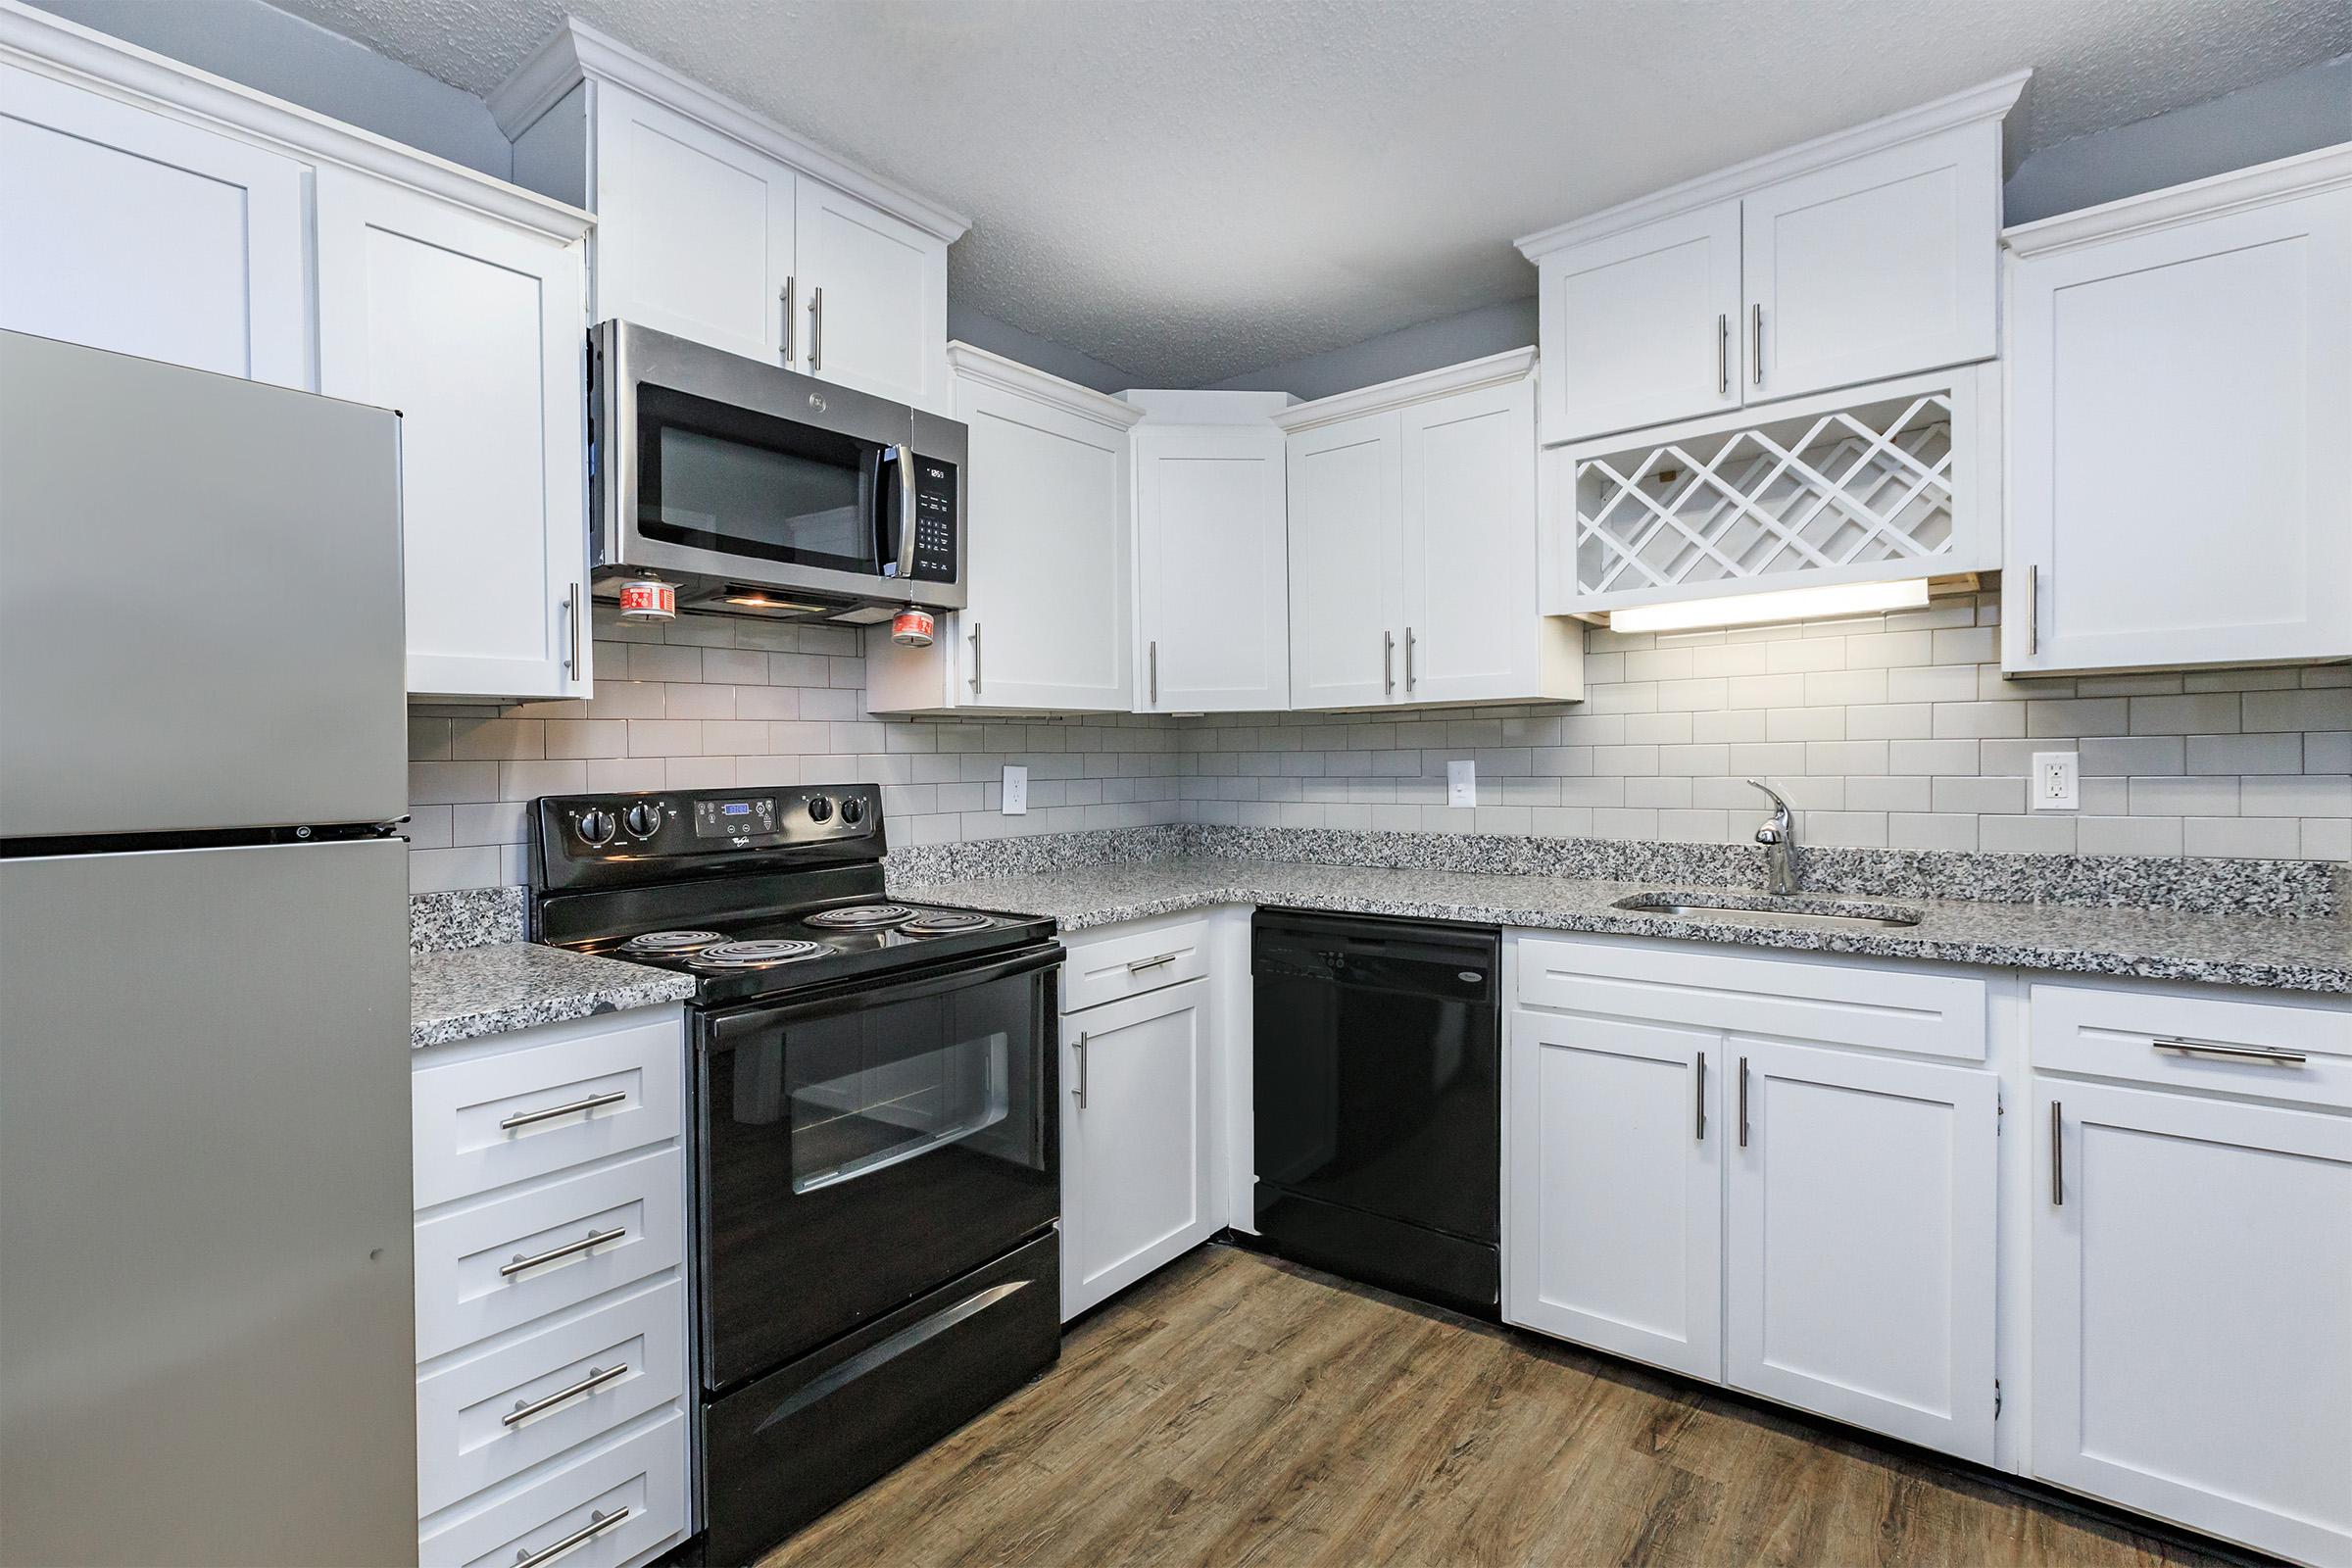 KINGSTON POINTE APARTMENTS HAS BLACK AND STEEL APPLIANCES